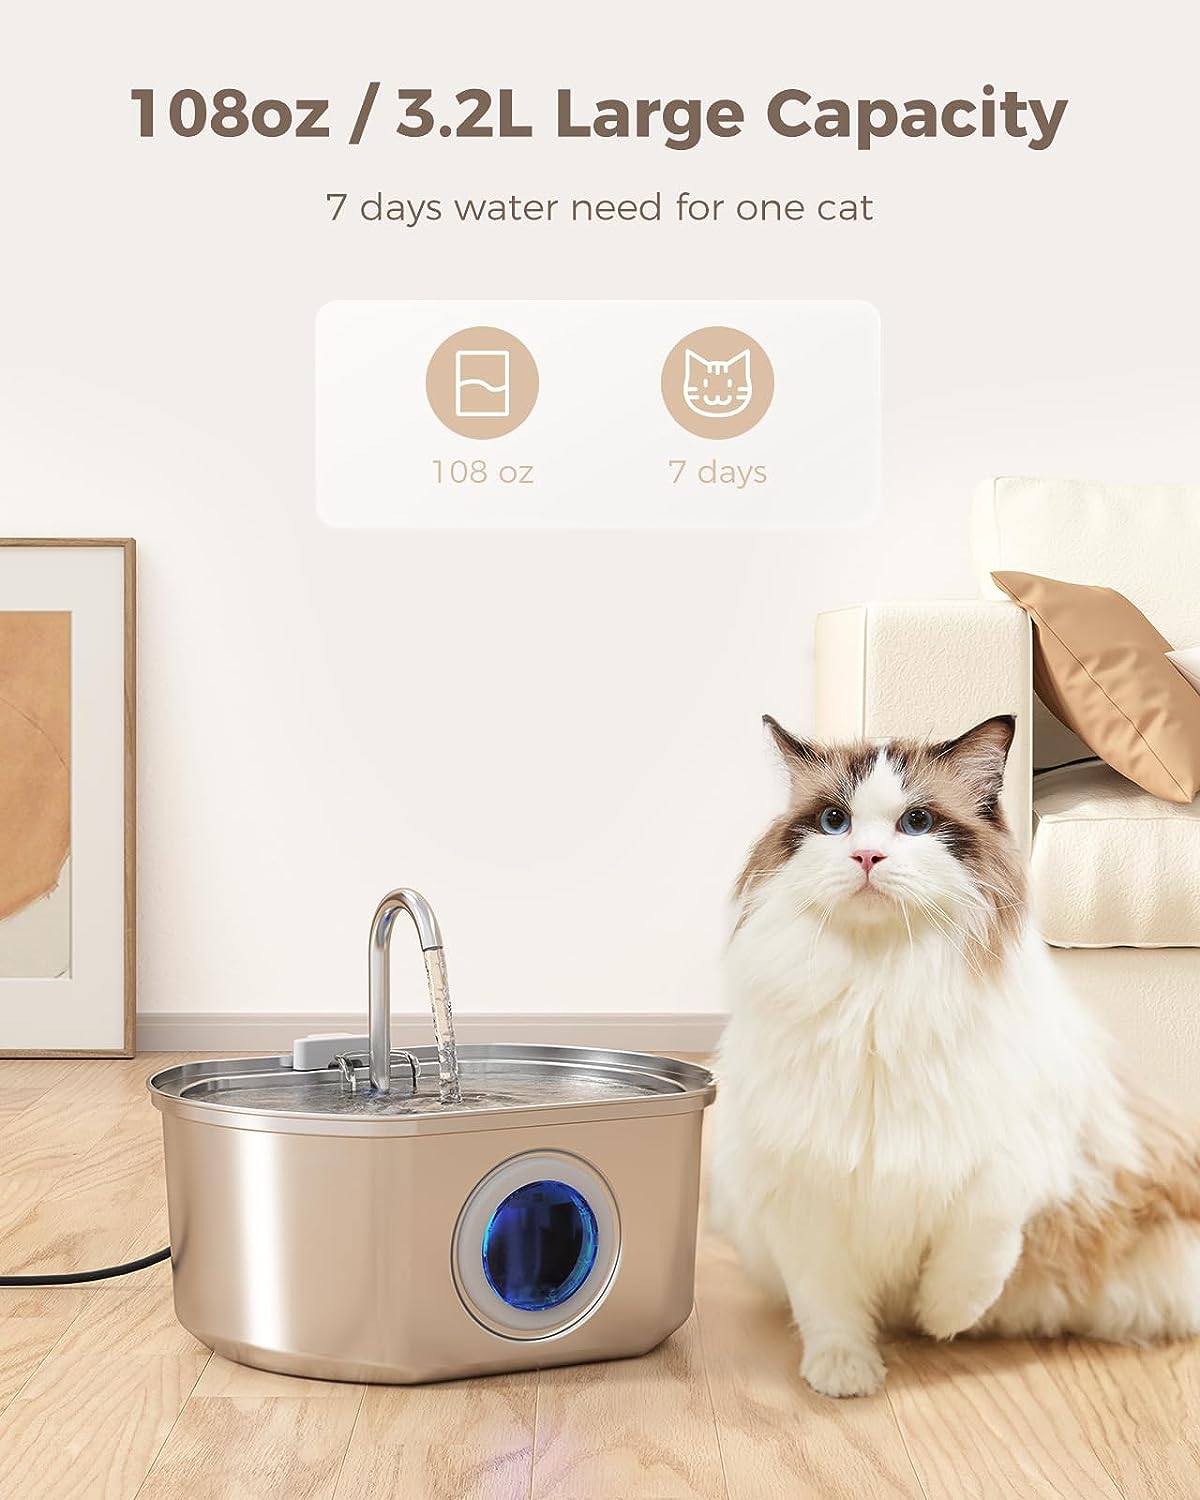 Cat Water Fountain Stainless Steel: 108oz/3.2L Cat Fountain for Drinking- Pet Water Fountain for Cats Inside - Automatic Cat Water Dispenser Bowl - Cat Feeding & Watering Supplies - Water Level Window